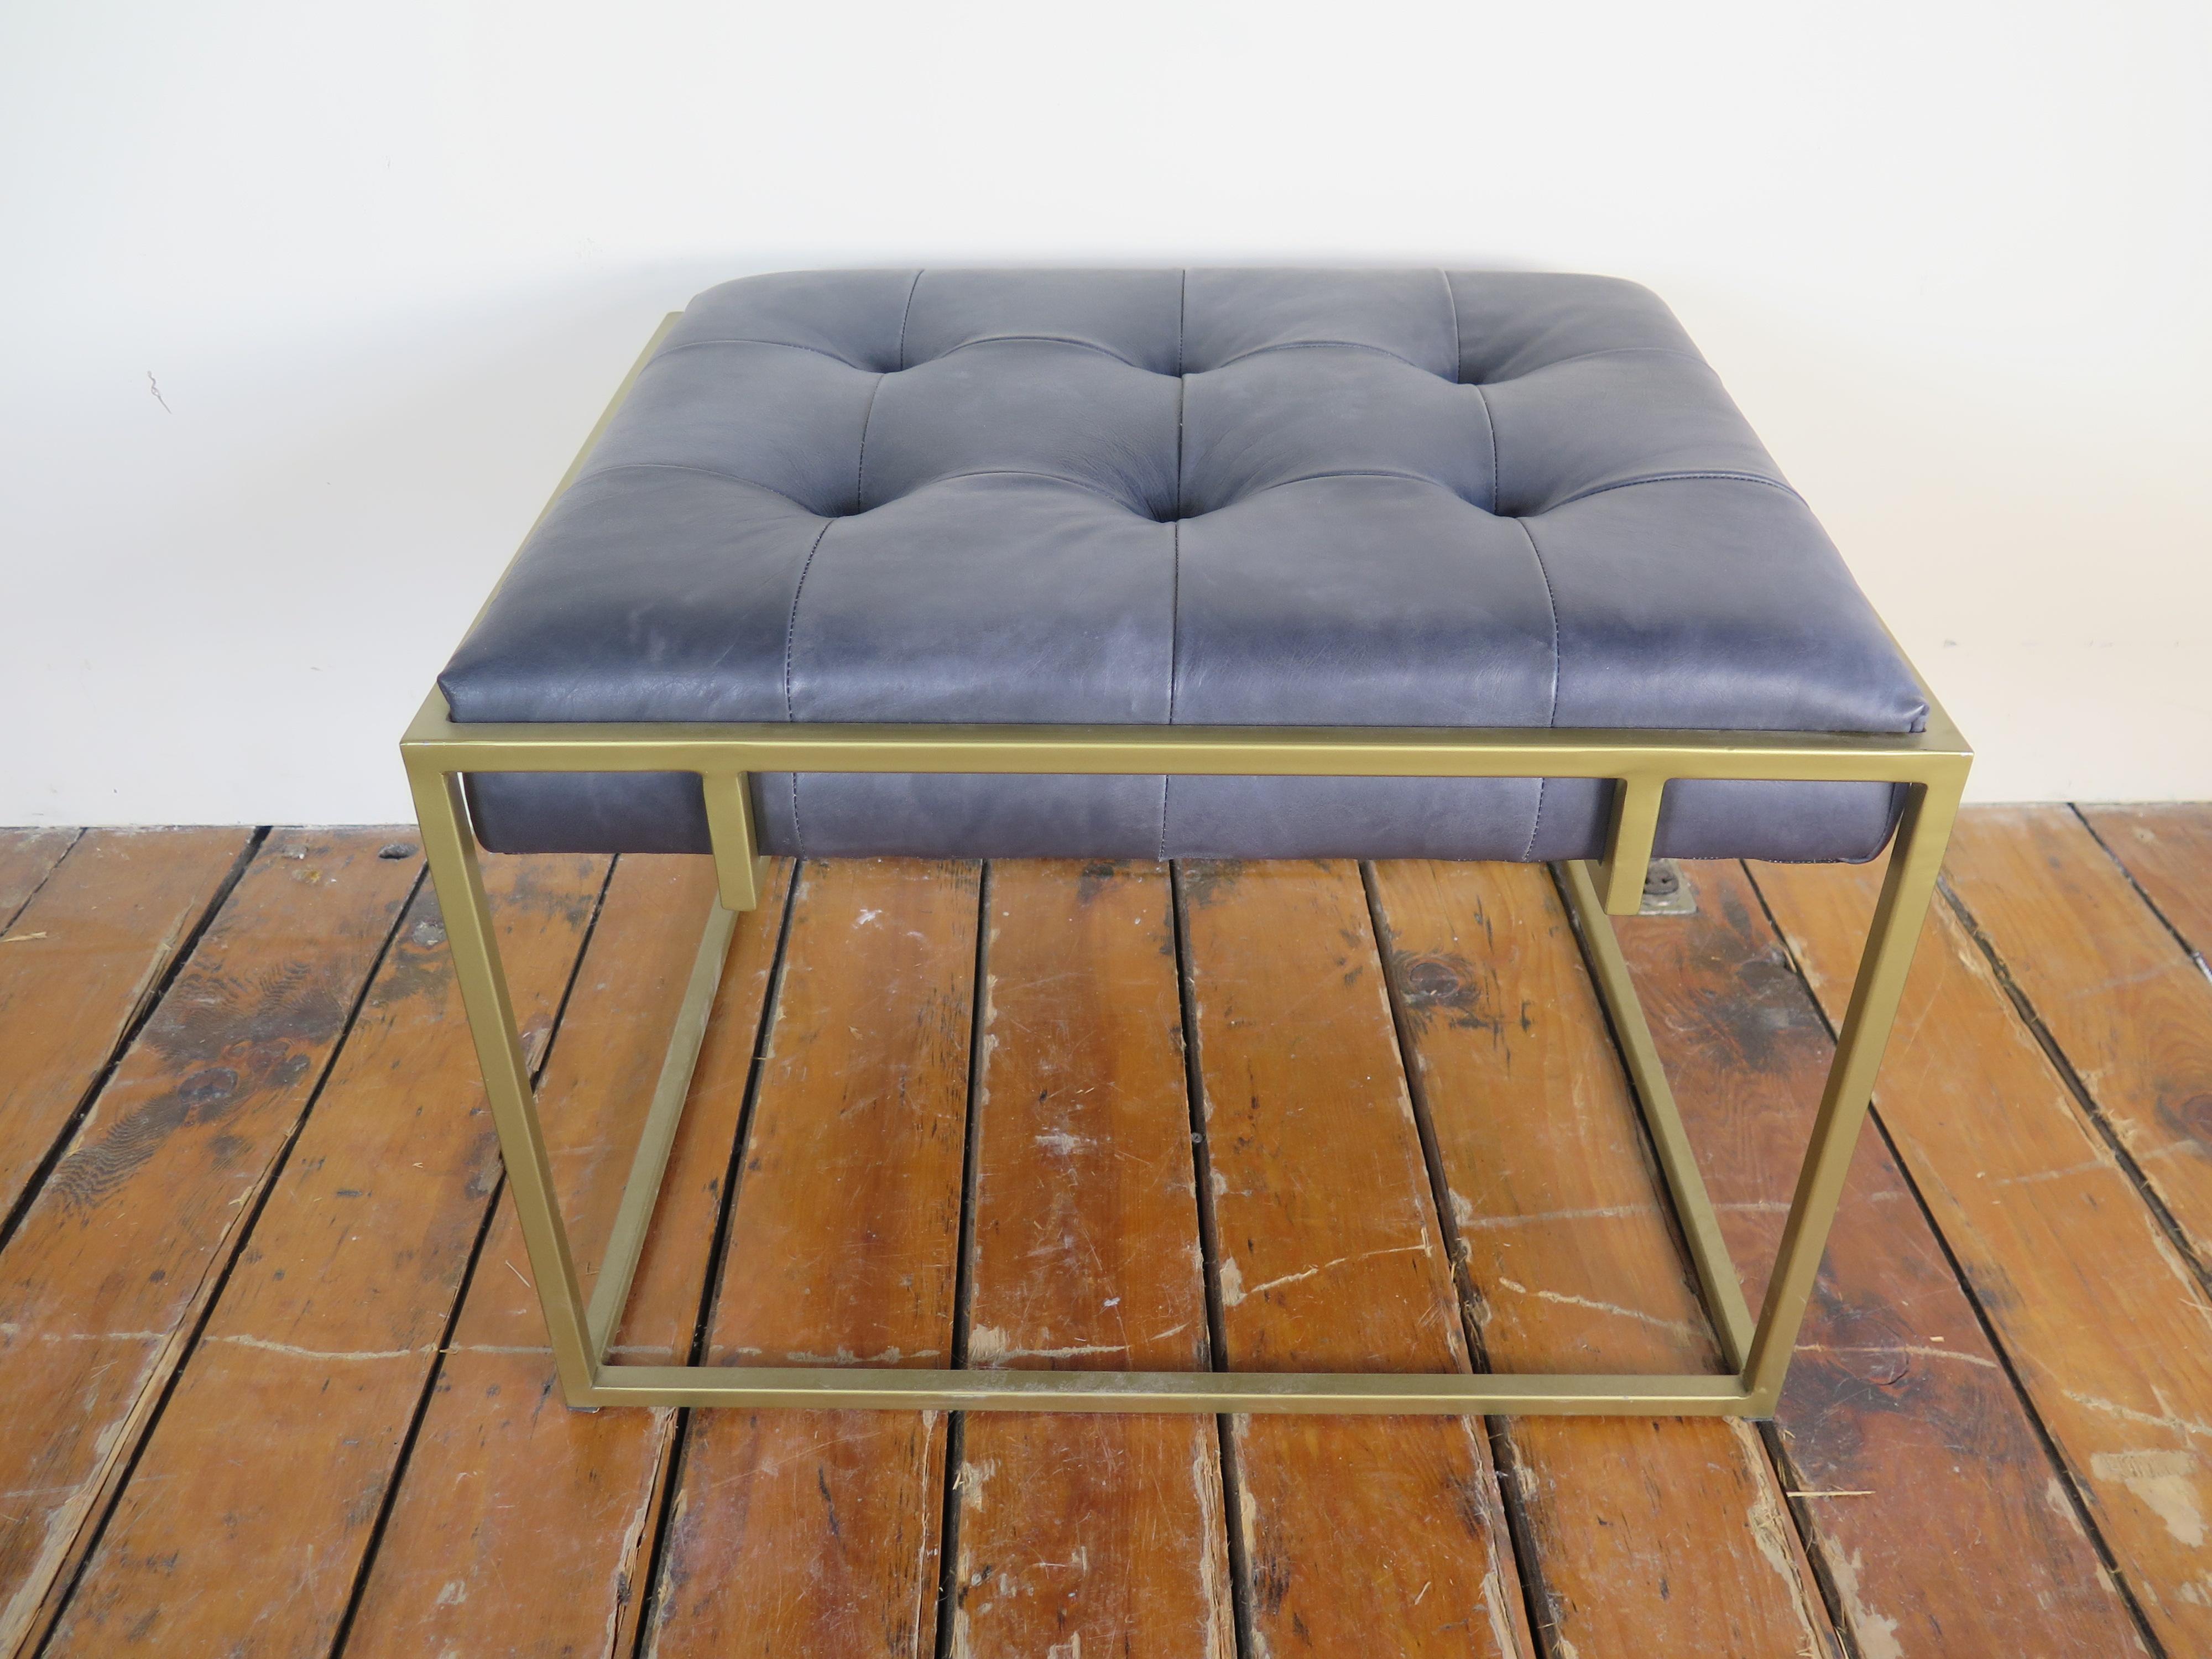 Leather tufted ottoman with gold metal legs.